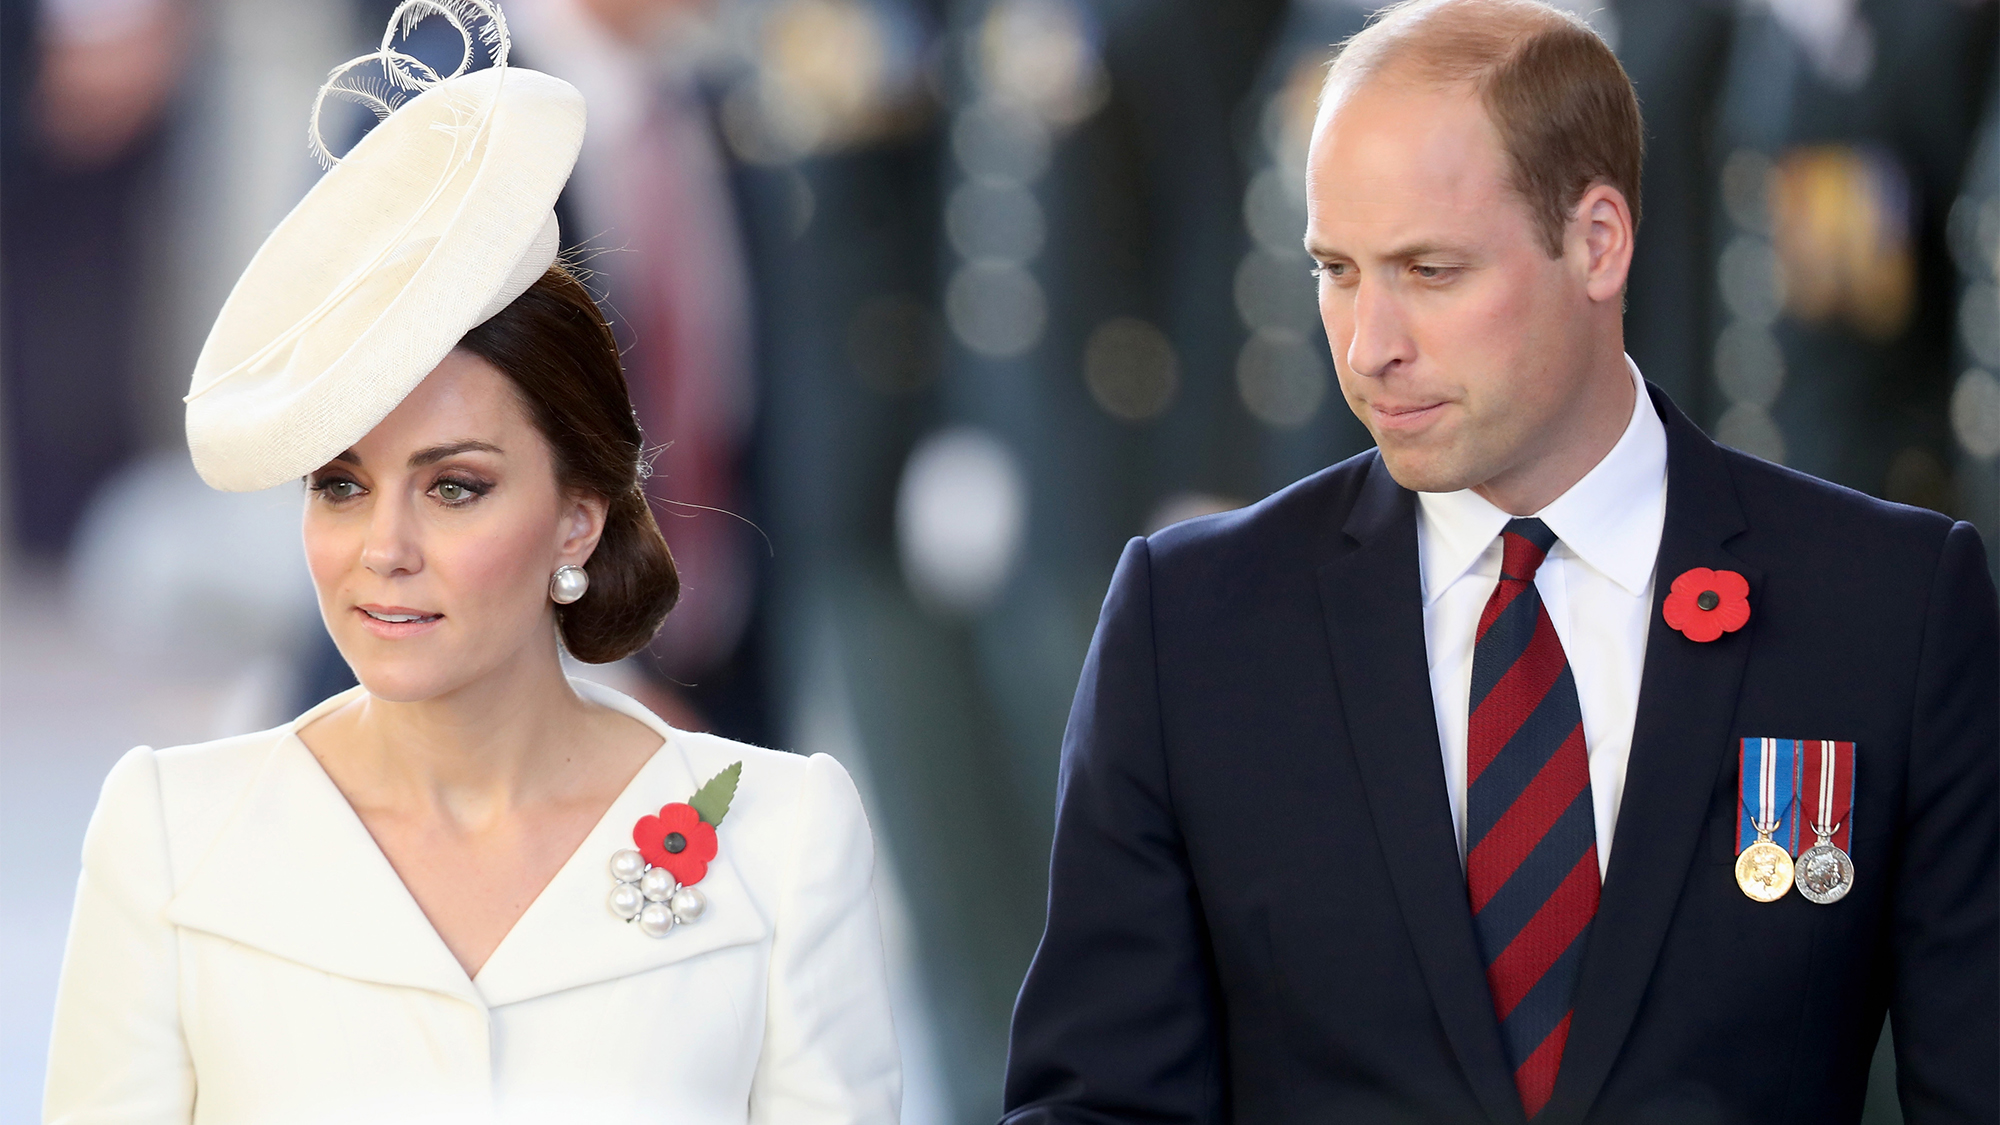 Kate Middleton and Prince William to have Divorce